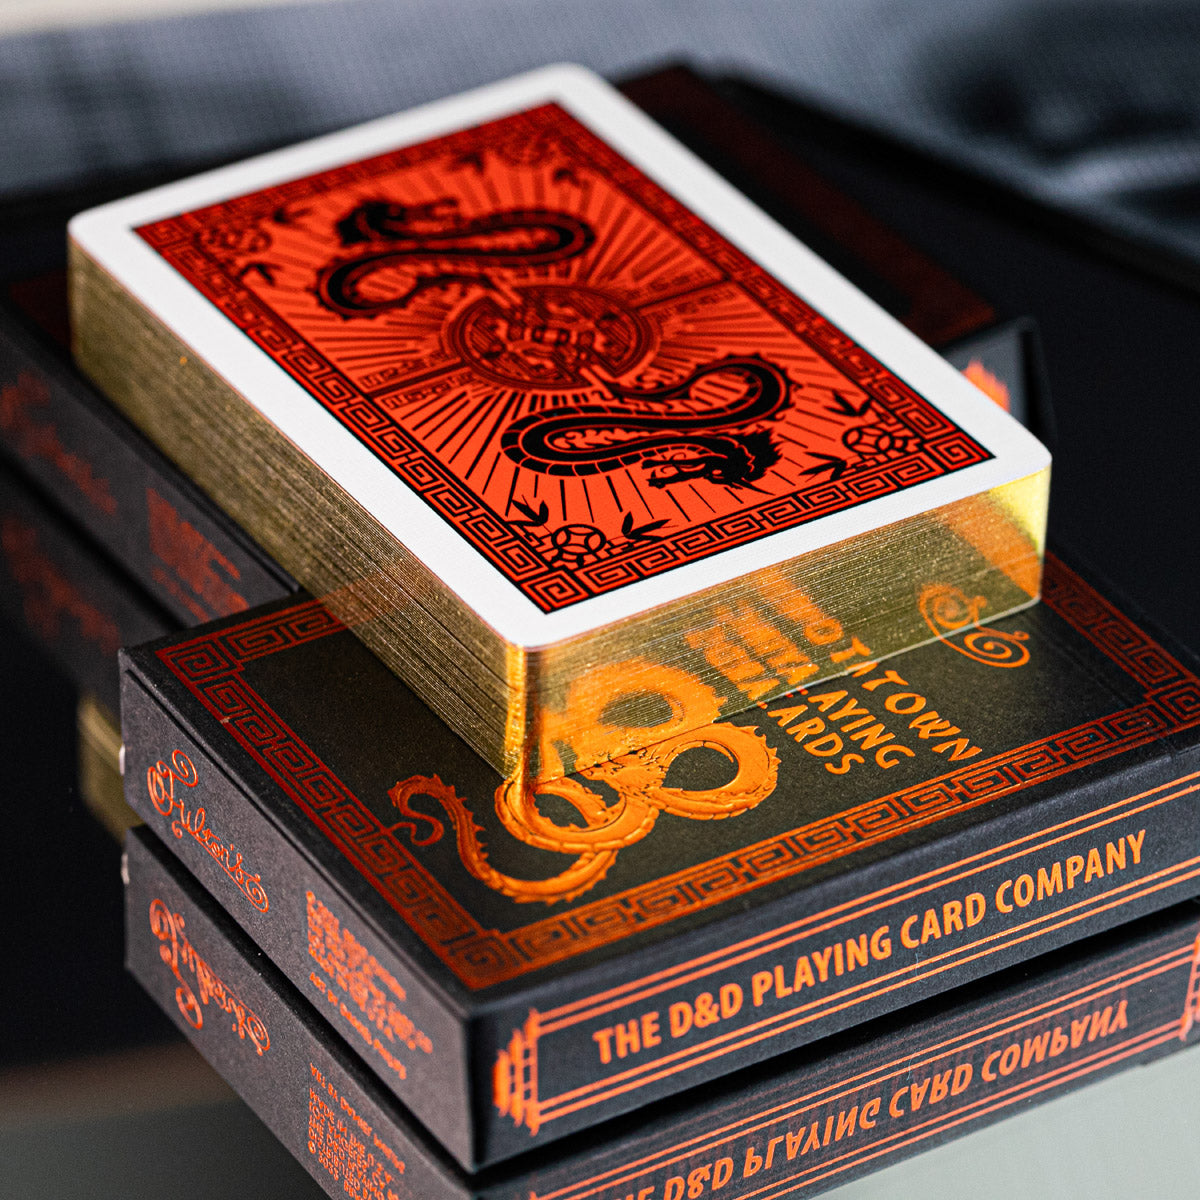 GILDED FULTON'S CHINATOWN TENTH ANNIVERSARY LIMITED EDITION PLAYING CARDS